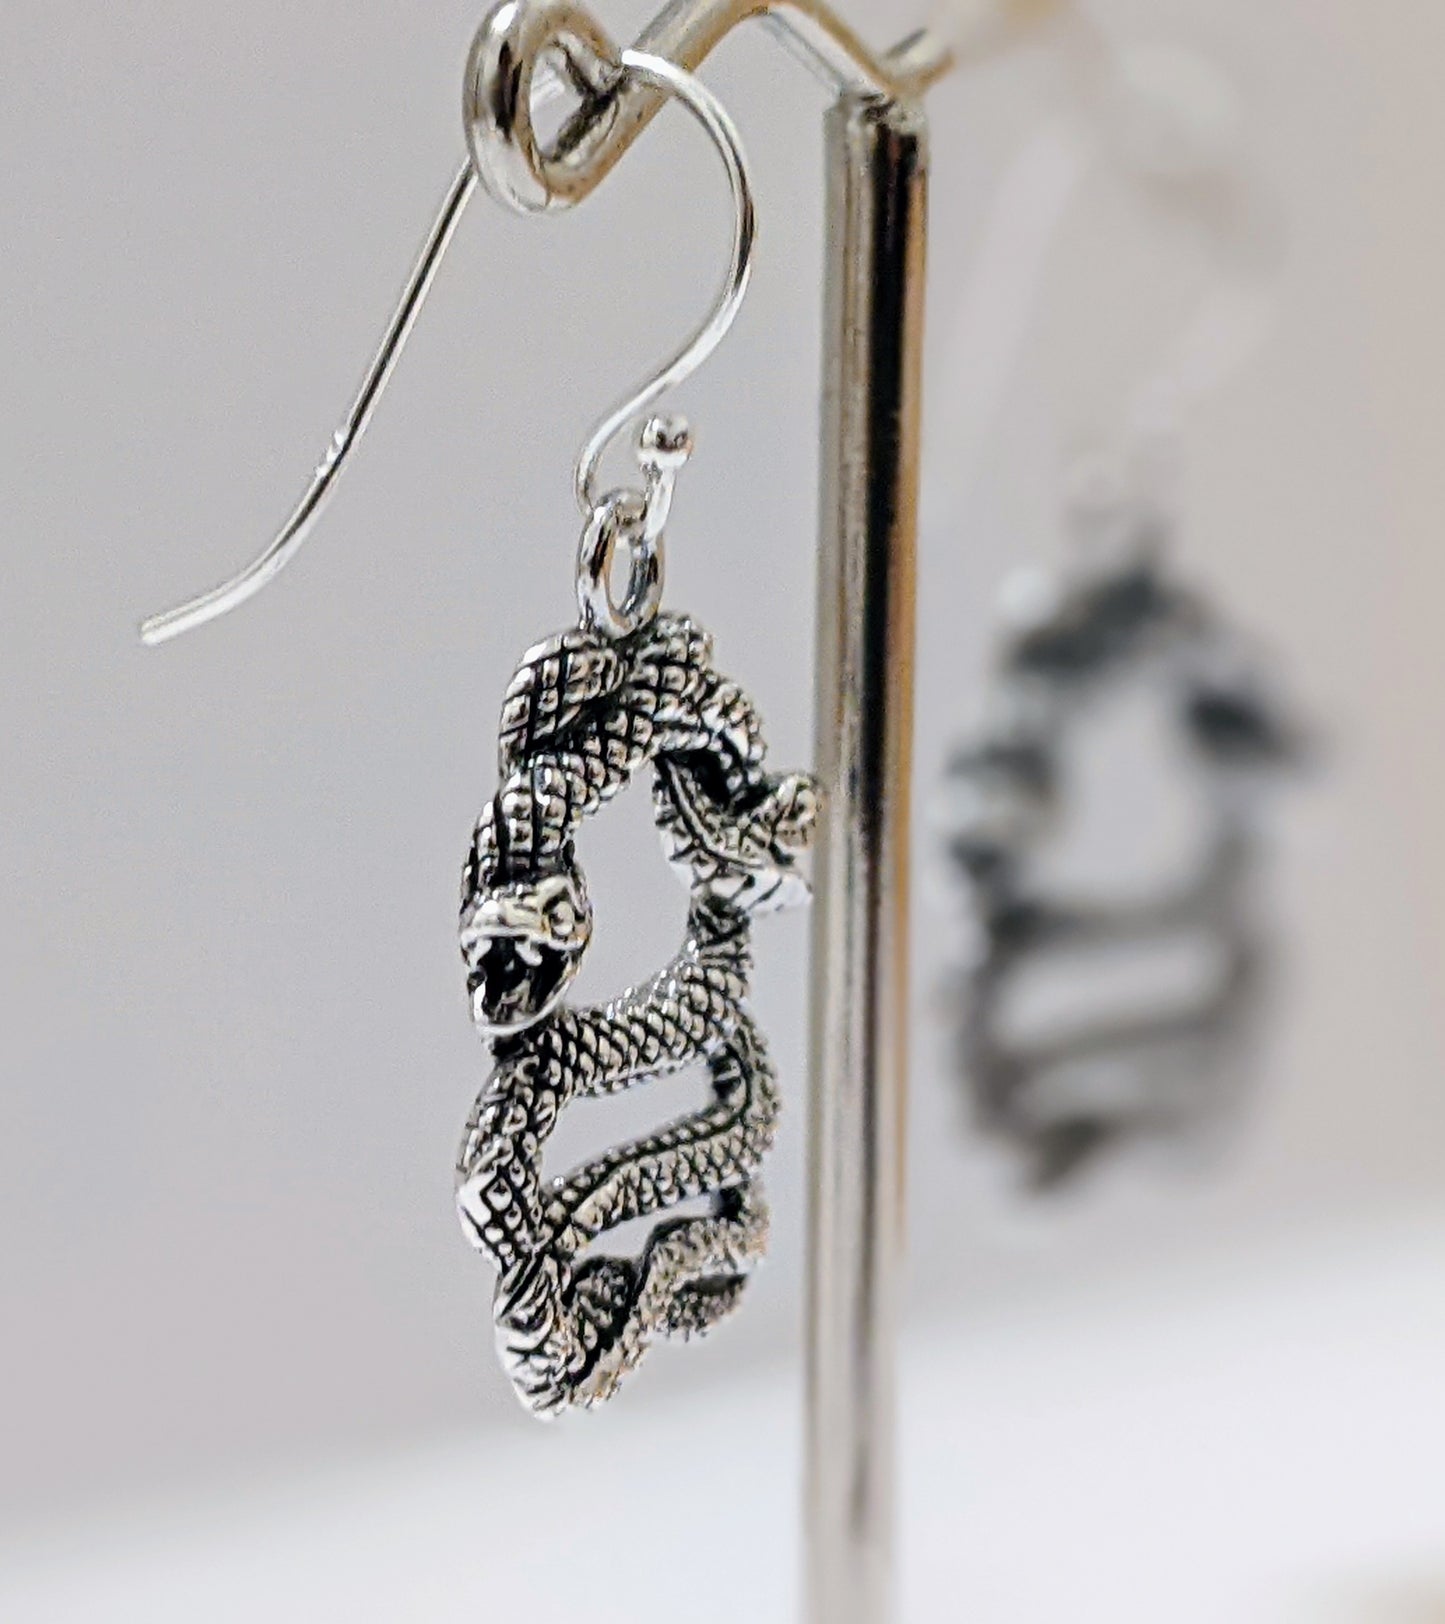 Coiled Serpents Earrings